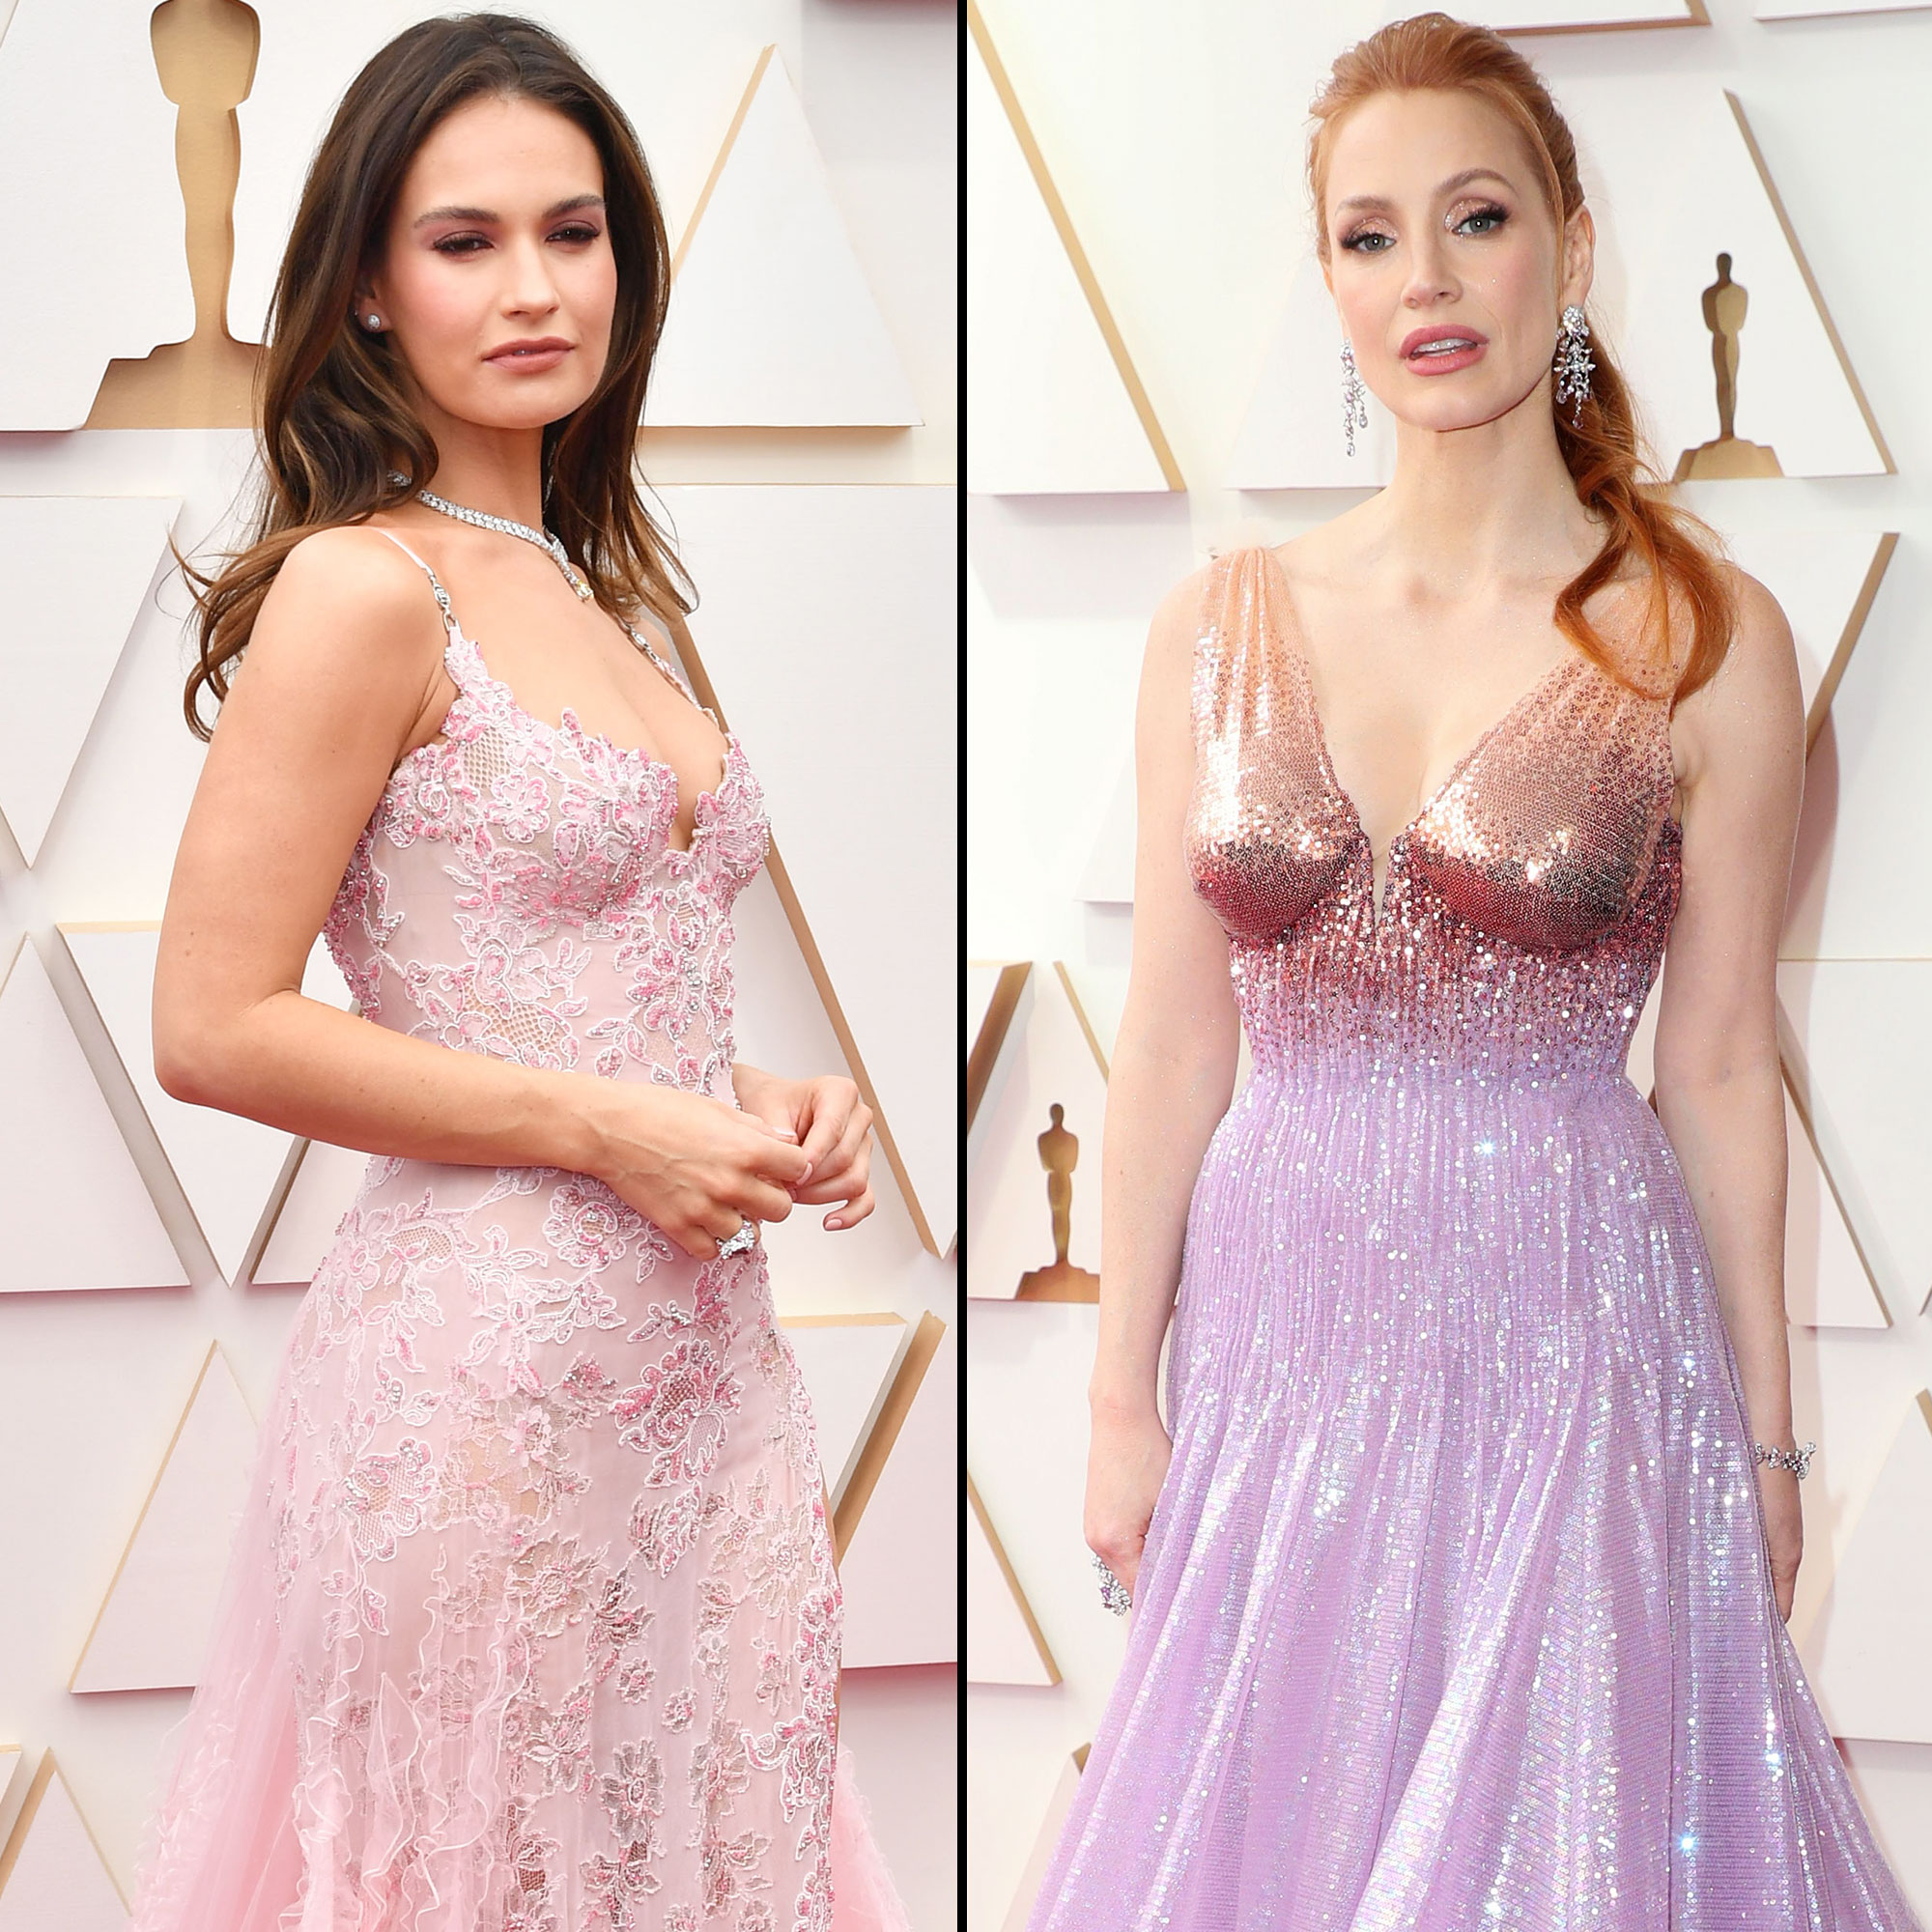 Best Red Carpet Fashion at 2022 Oscars – The Hollywood Reporter